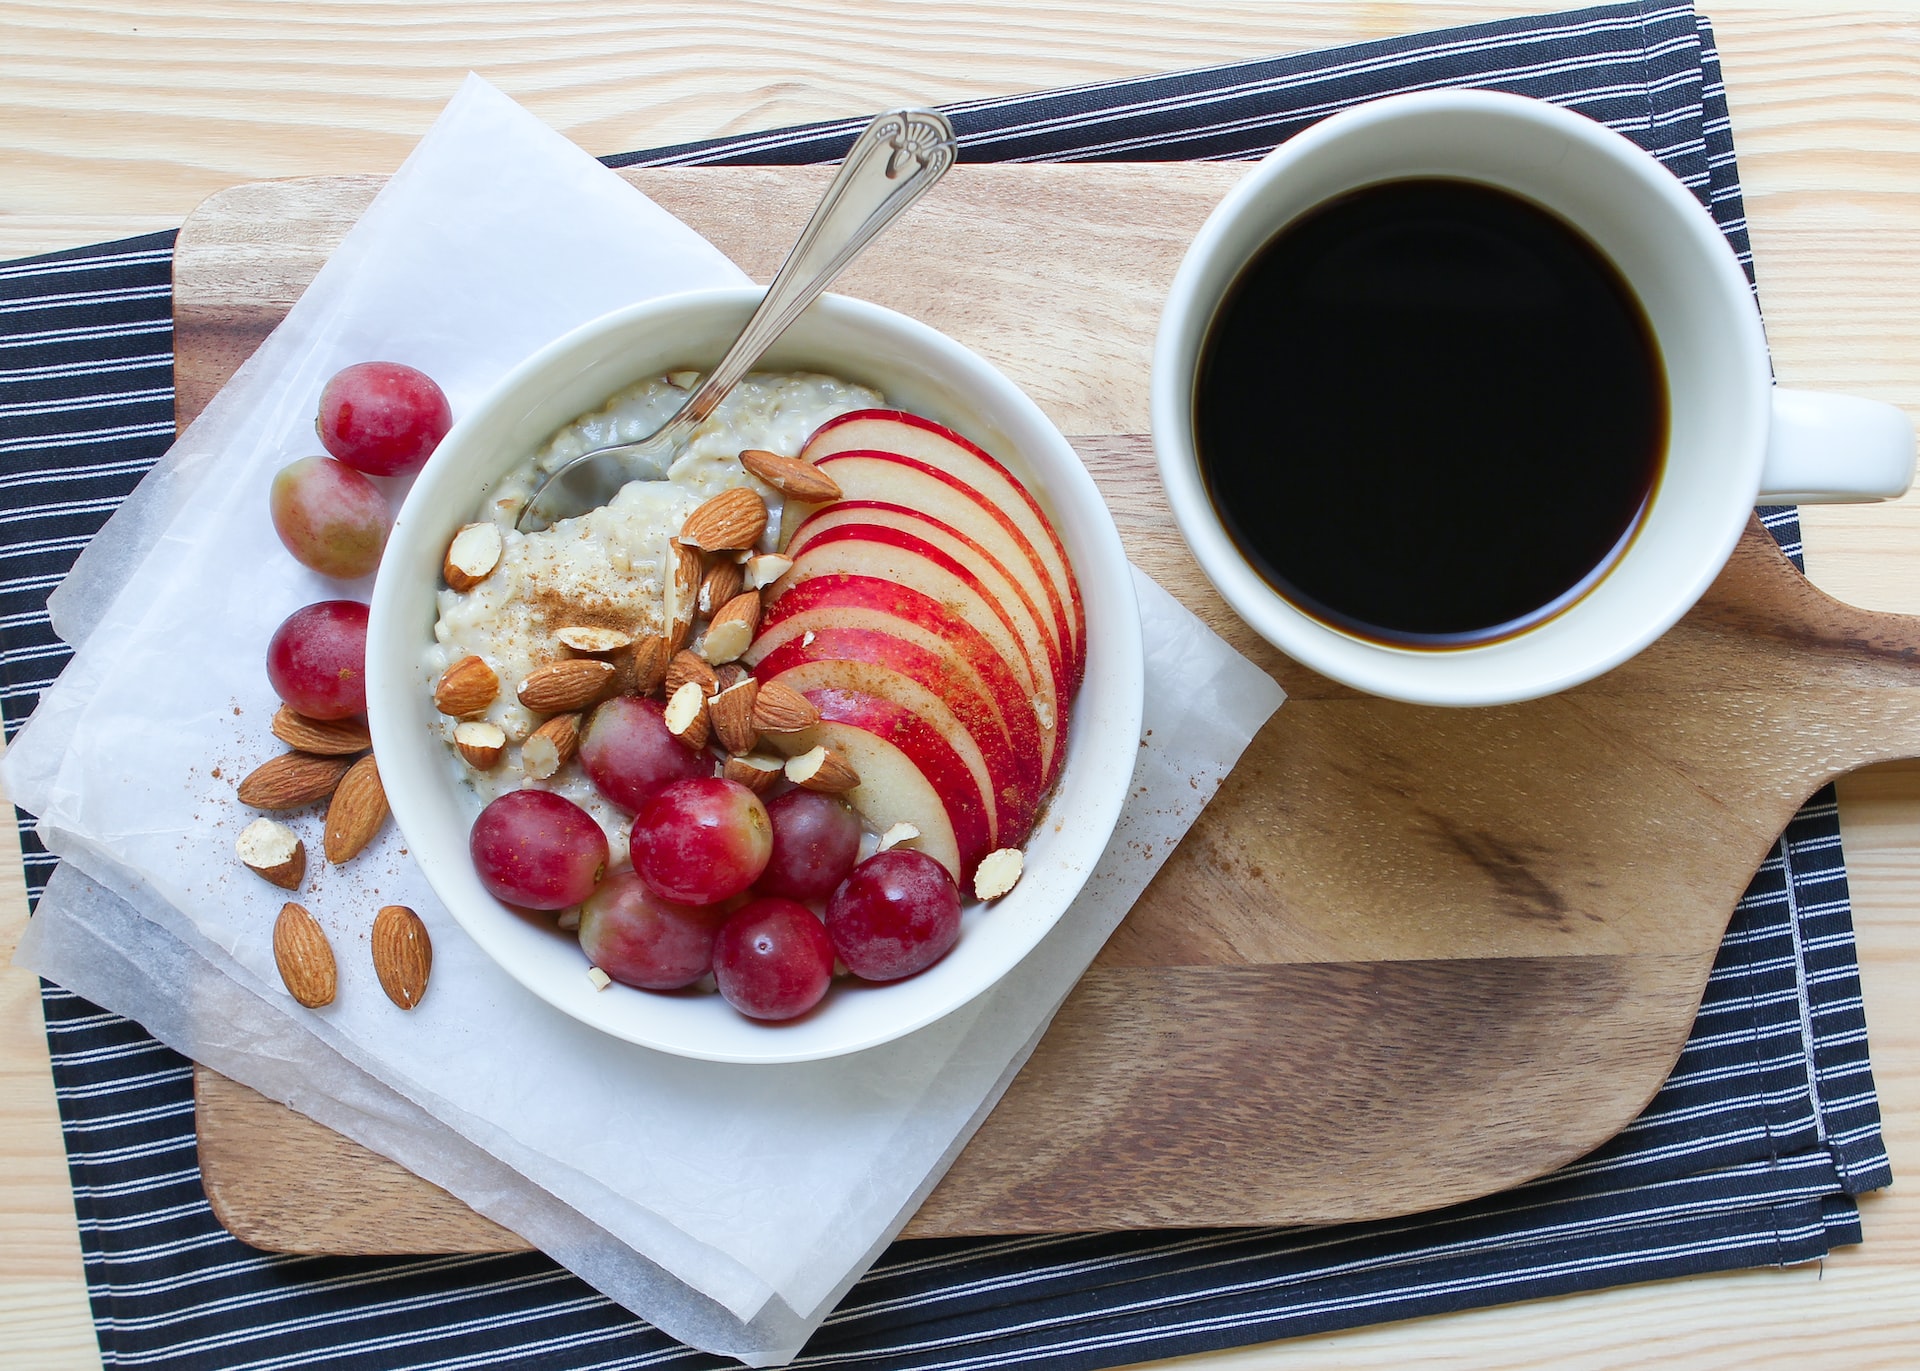 A bowl with apple slices and a cup of coffee